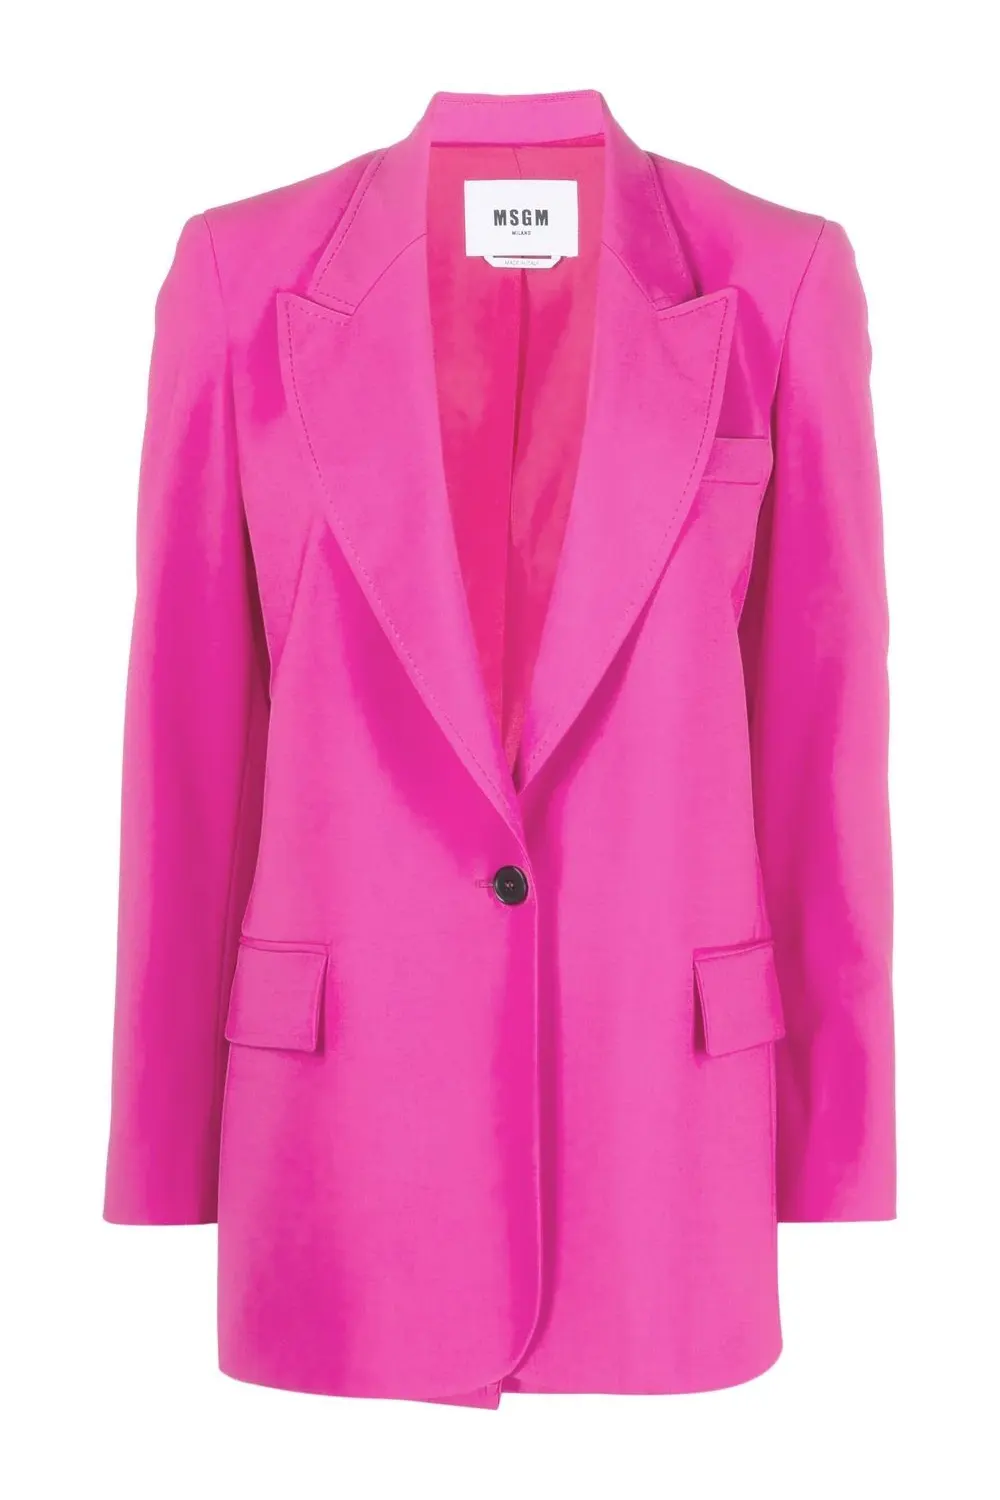 Buttoned-up single-breasted blazer, pink